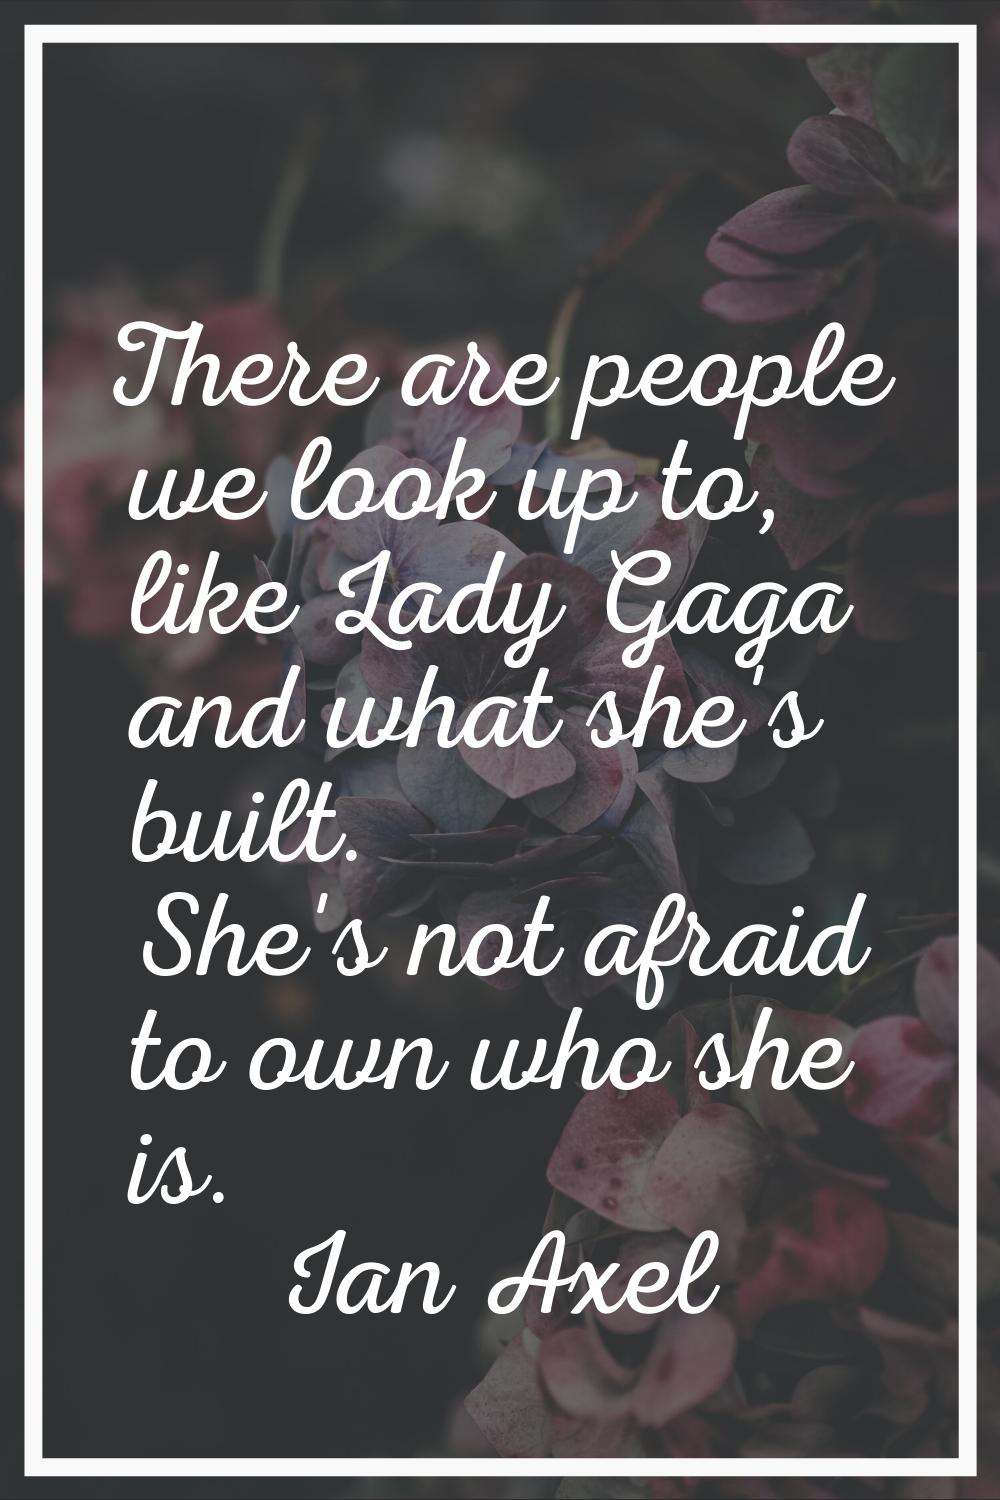 There are people we look up to, like Lady Gaga and what she's built. She's not afraid to own who sh